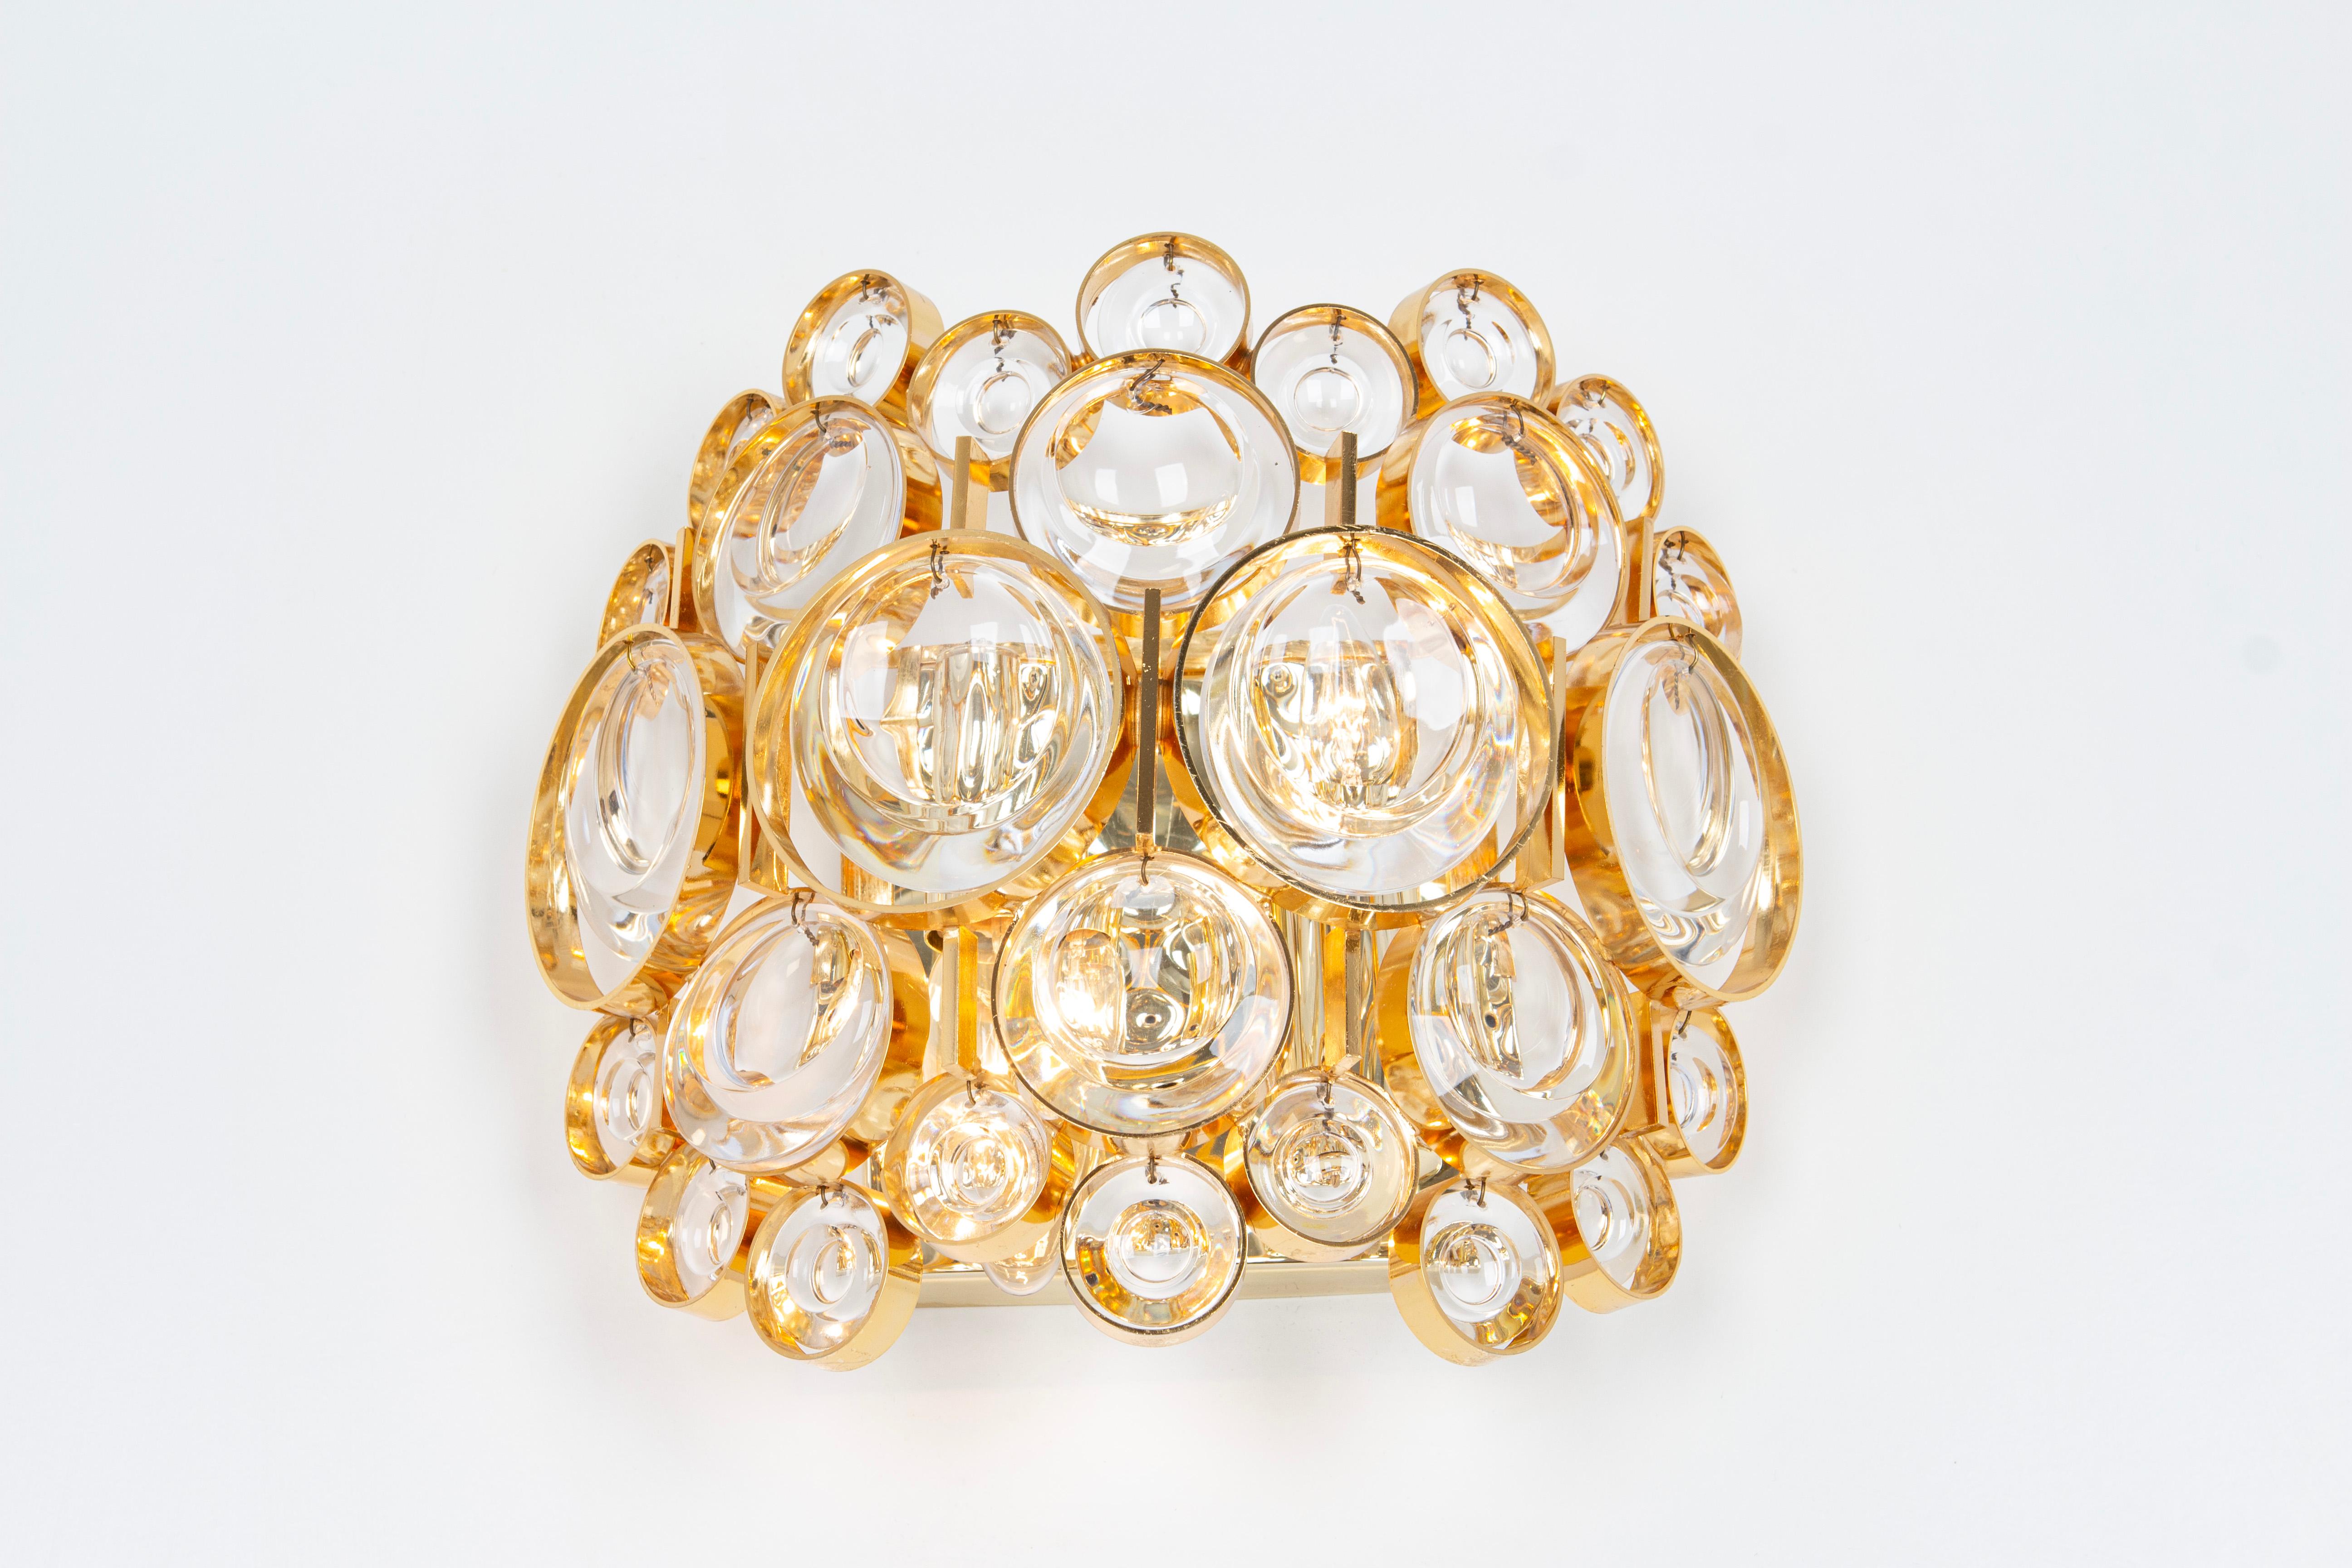 A stunning golden sconce, made by Palwa, Germany, circa 1960-1969. Crystal glasses on a gilt brass frame.
Best of the 1960s from Germany.
High quality and in very good condition. Cleaned, well-wired and ready to use.
Each Scounce requires 2 x E14